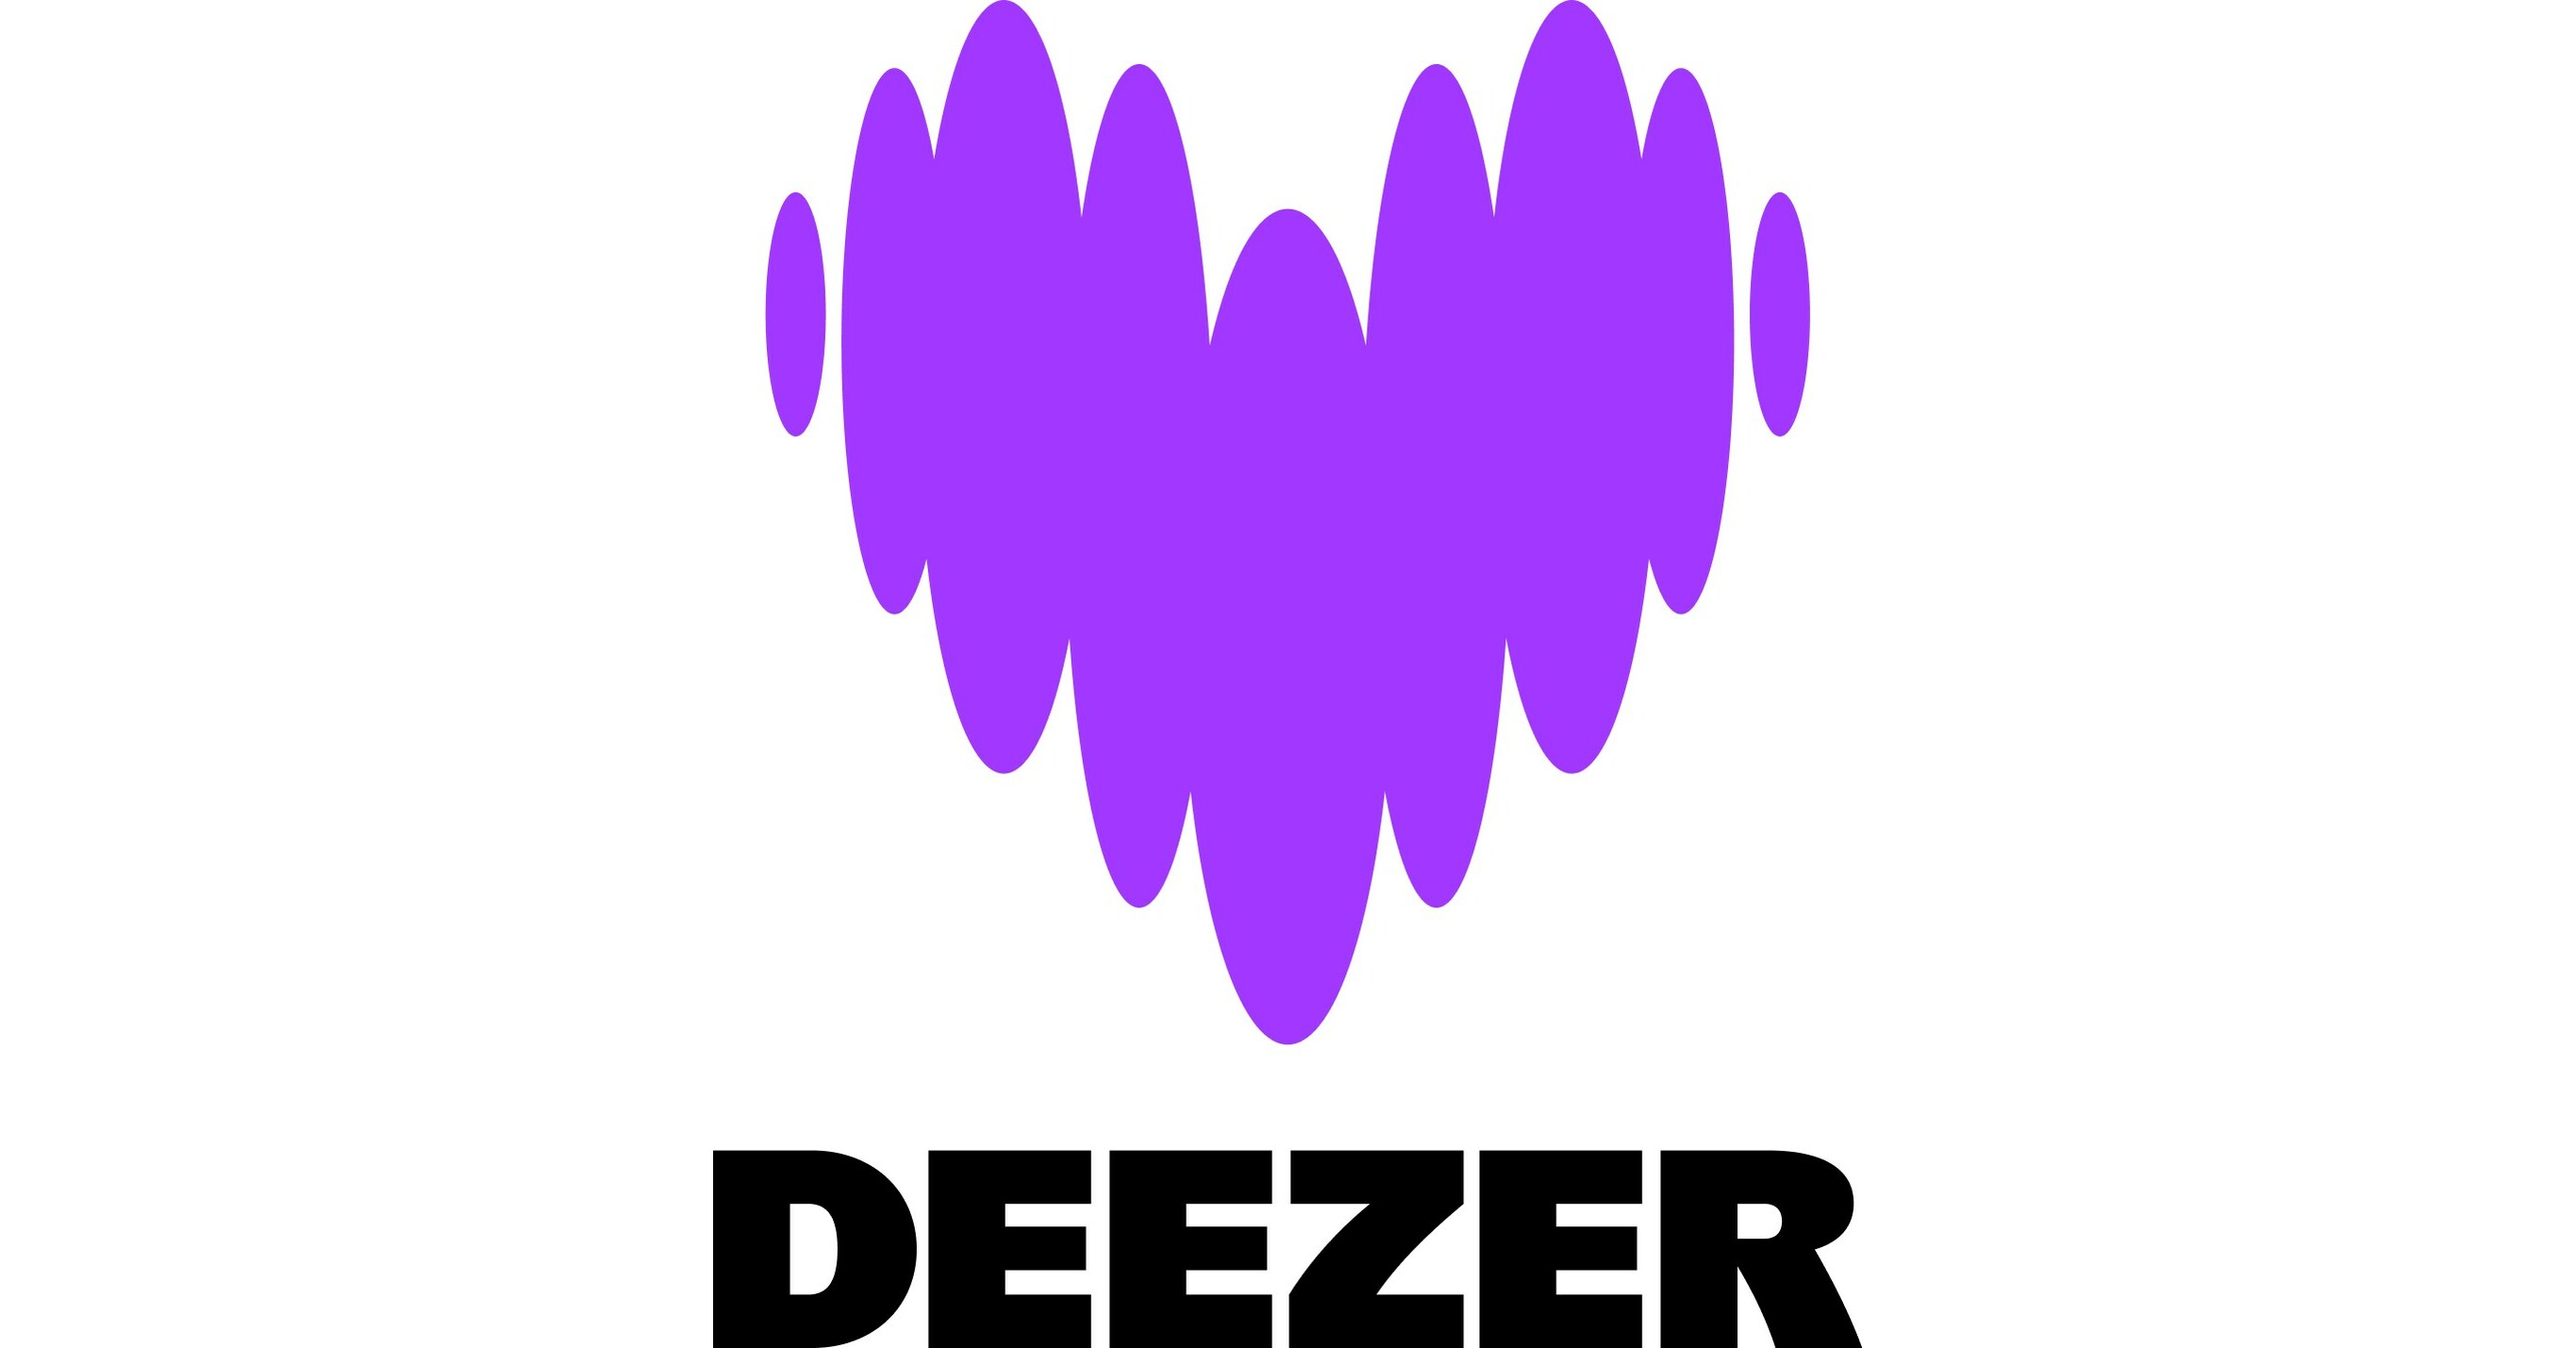 Deezer reveals bold new brand identity and logo - setting the stage for ...